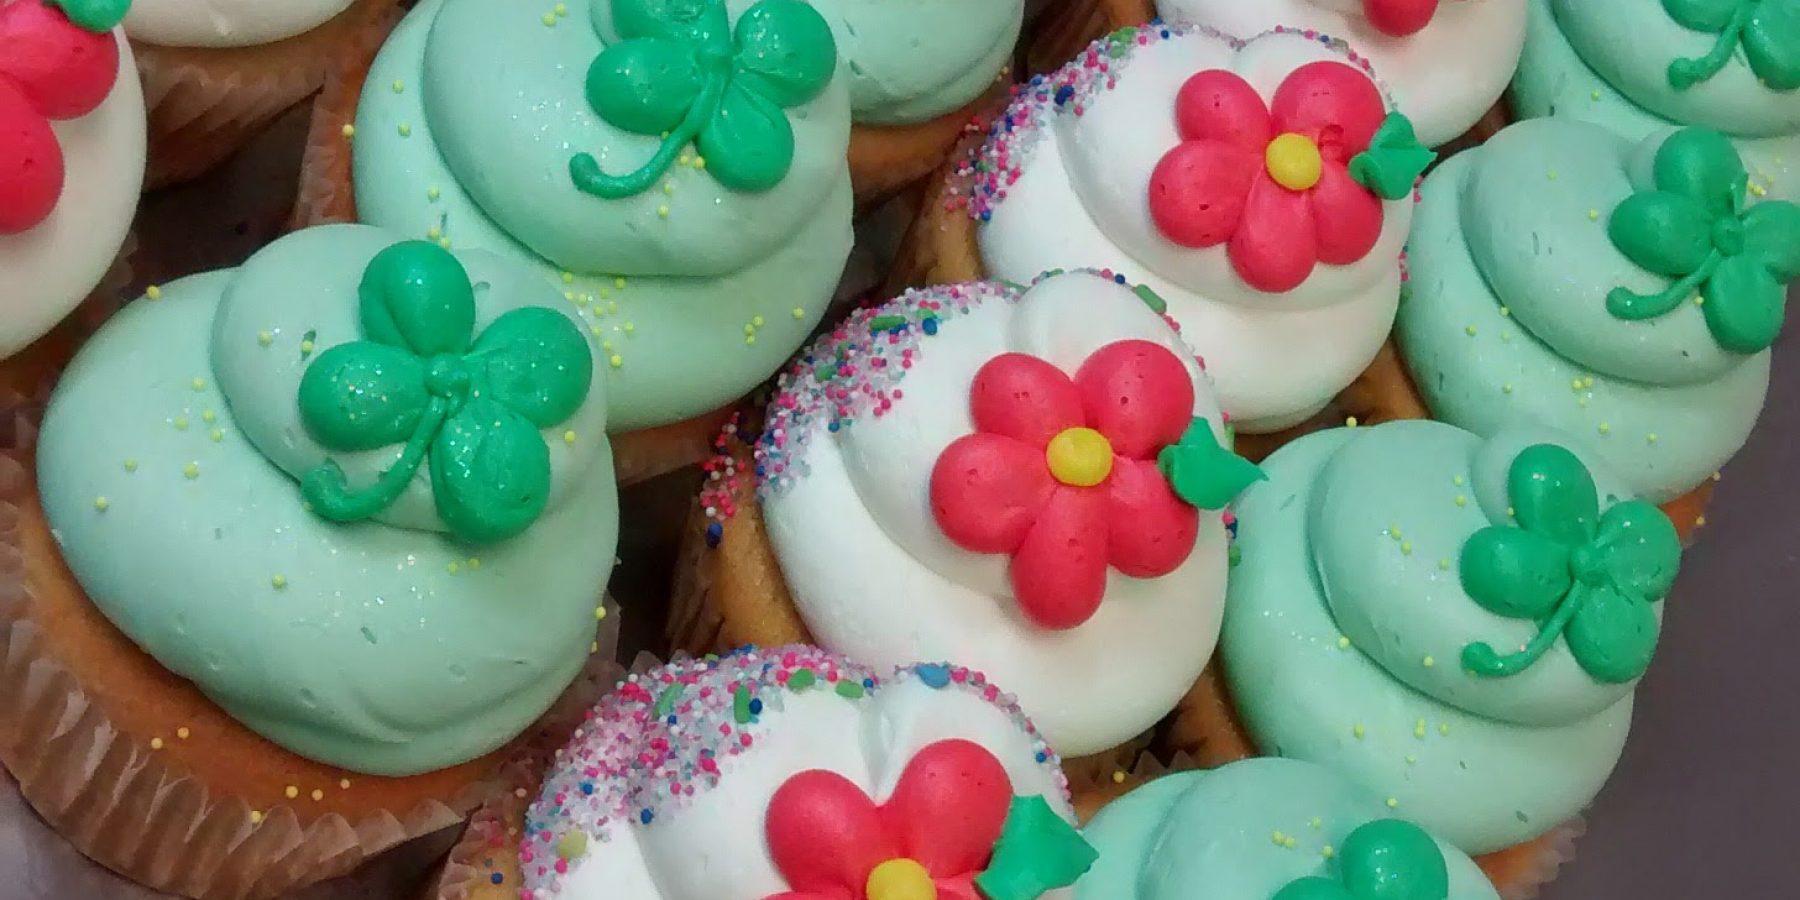 Cupcakes with clovers and flowers